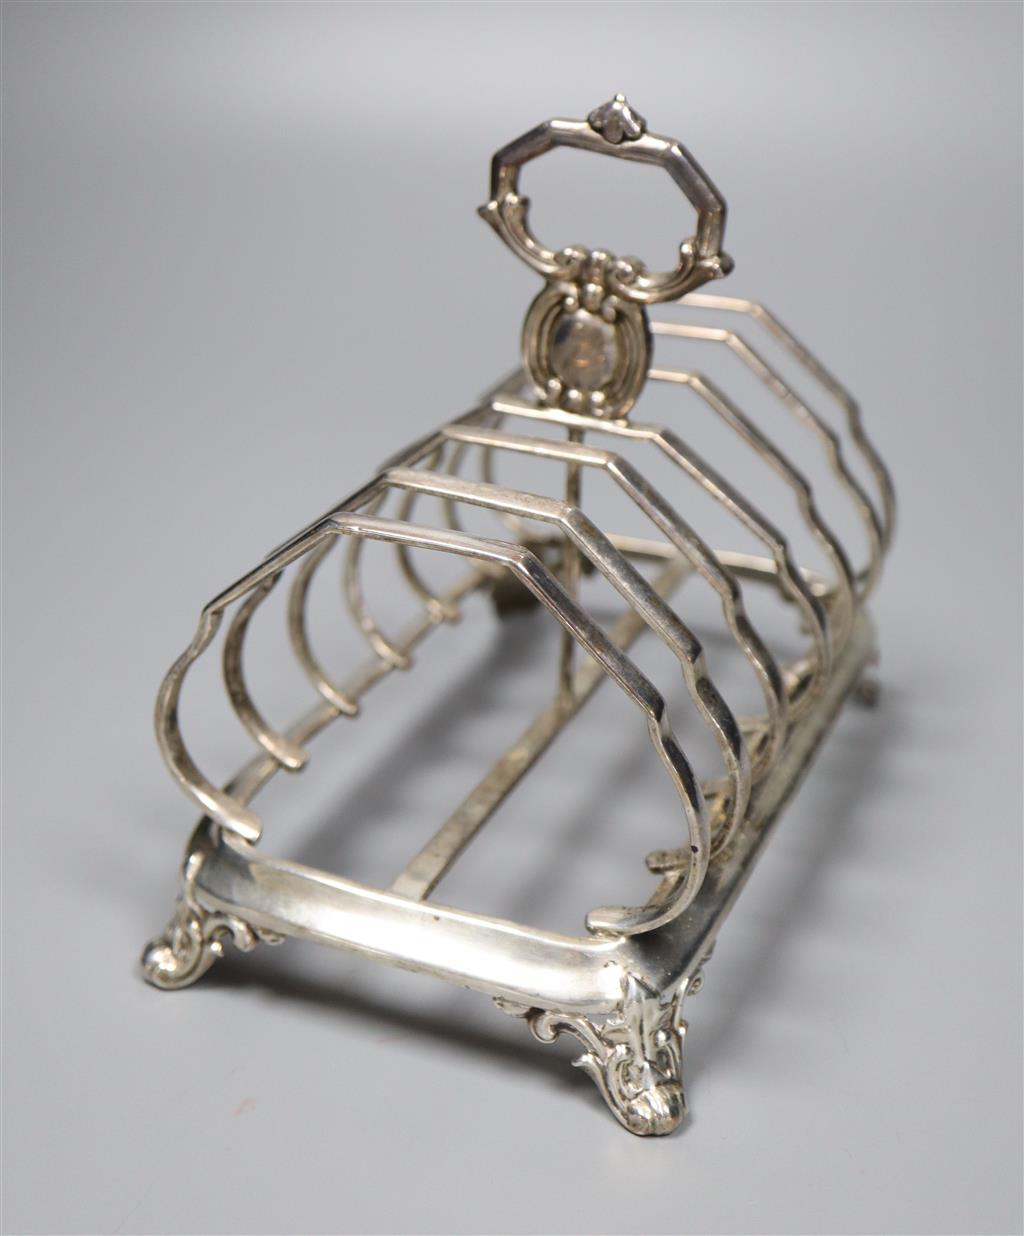 A Victorian silver six-division toast rack, George Angell & Co, London, 1853, length 16.3cm, 10oz.